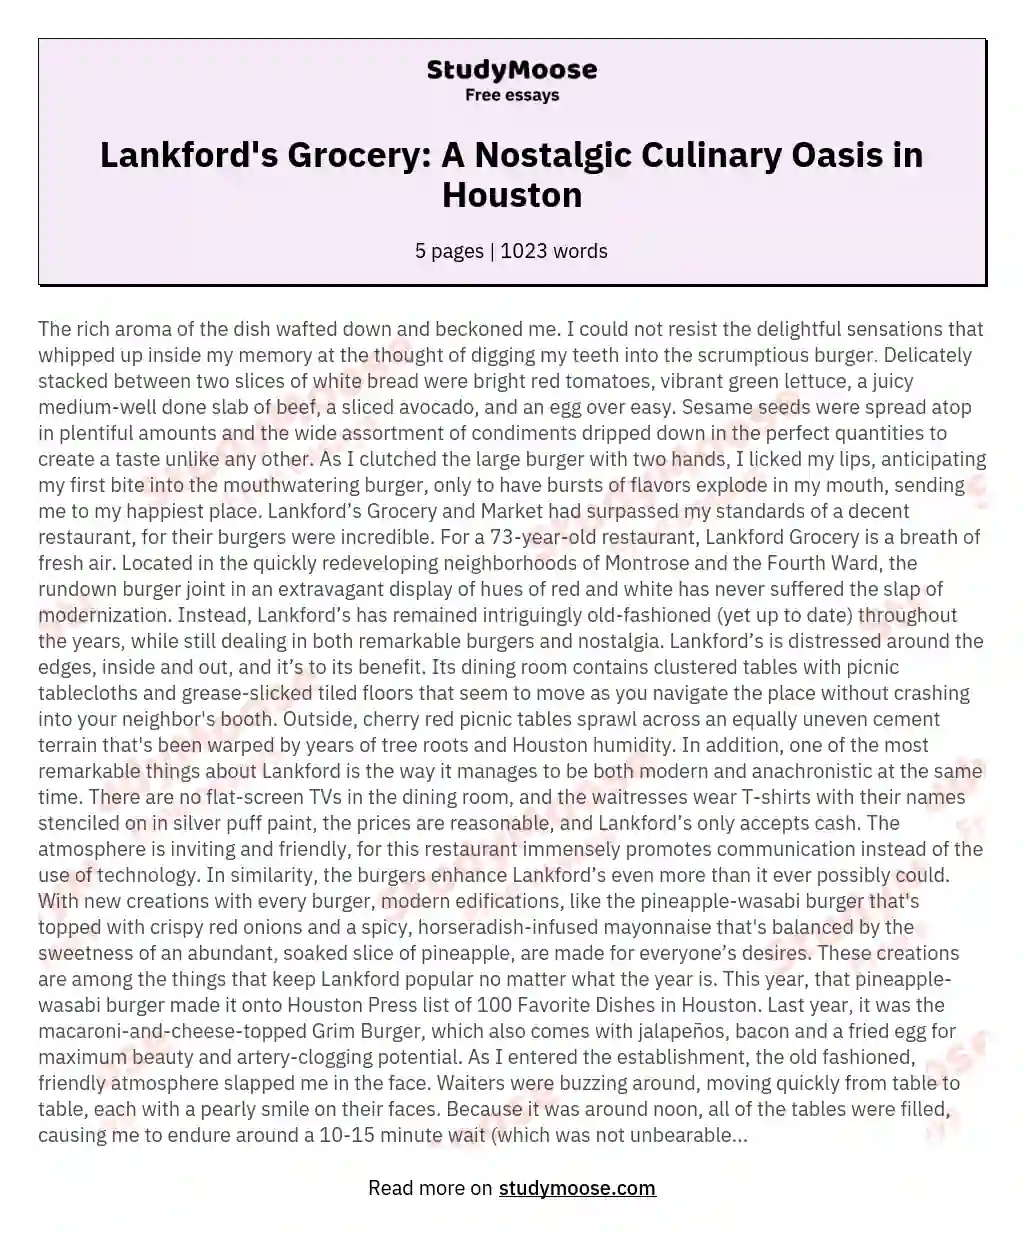 Lankford's Grocery: A Nostalgic Culinary Oasis in Houston essay